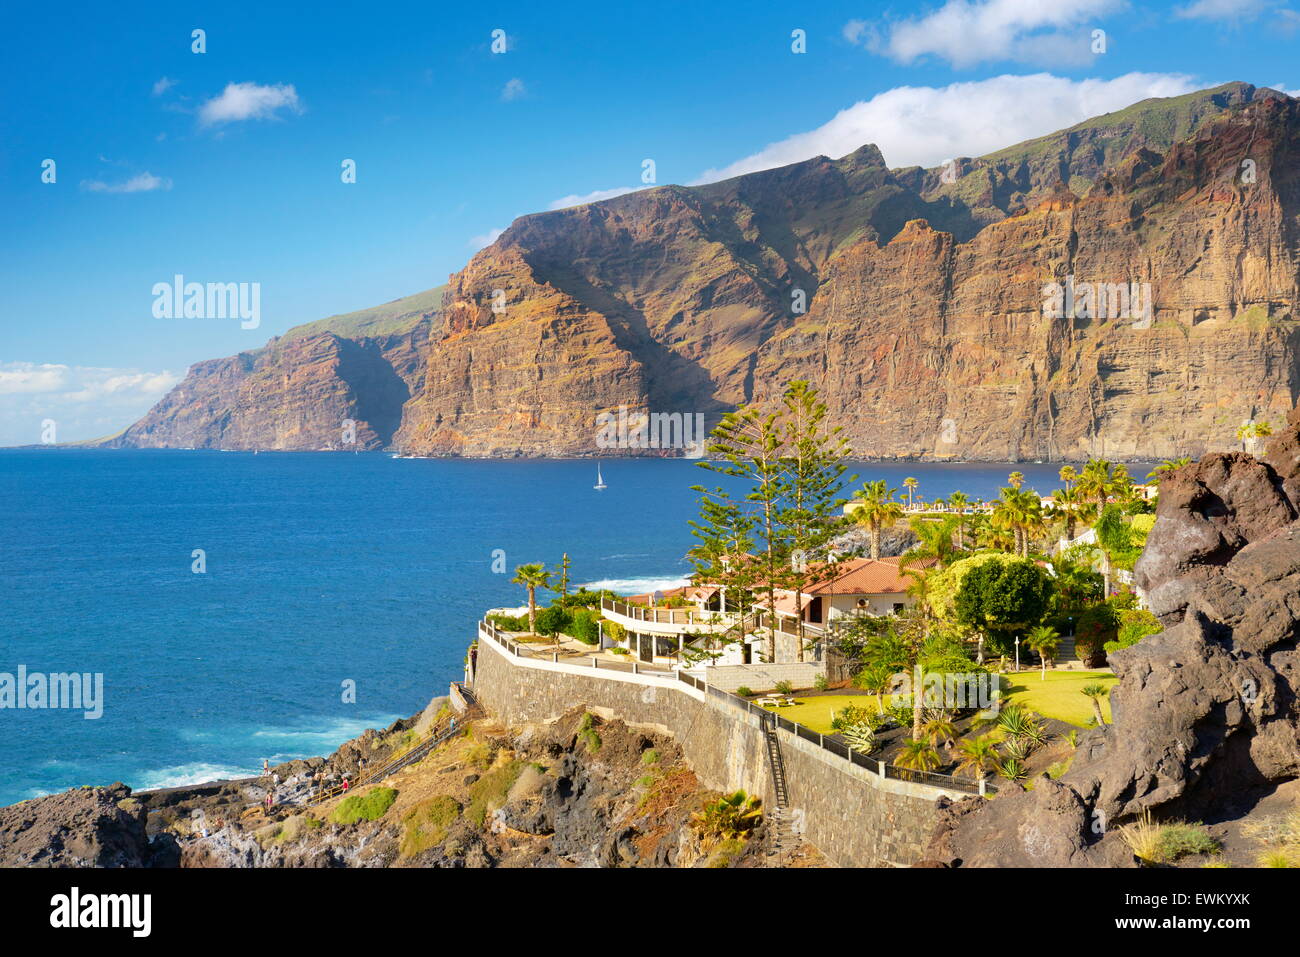 Los Gigantes Cliff, Tenerife, Isole Canarie, Spagna Foto Stock